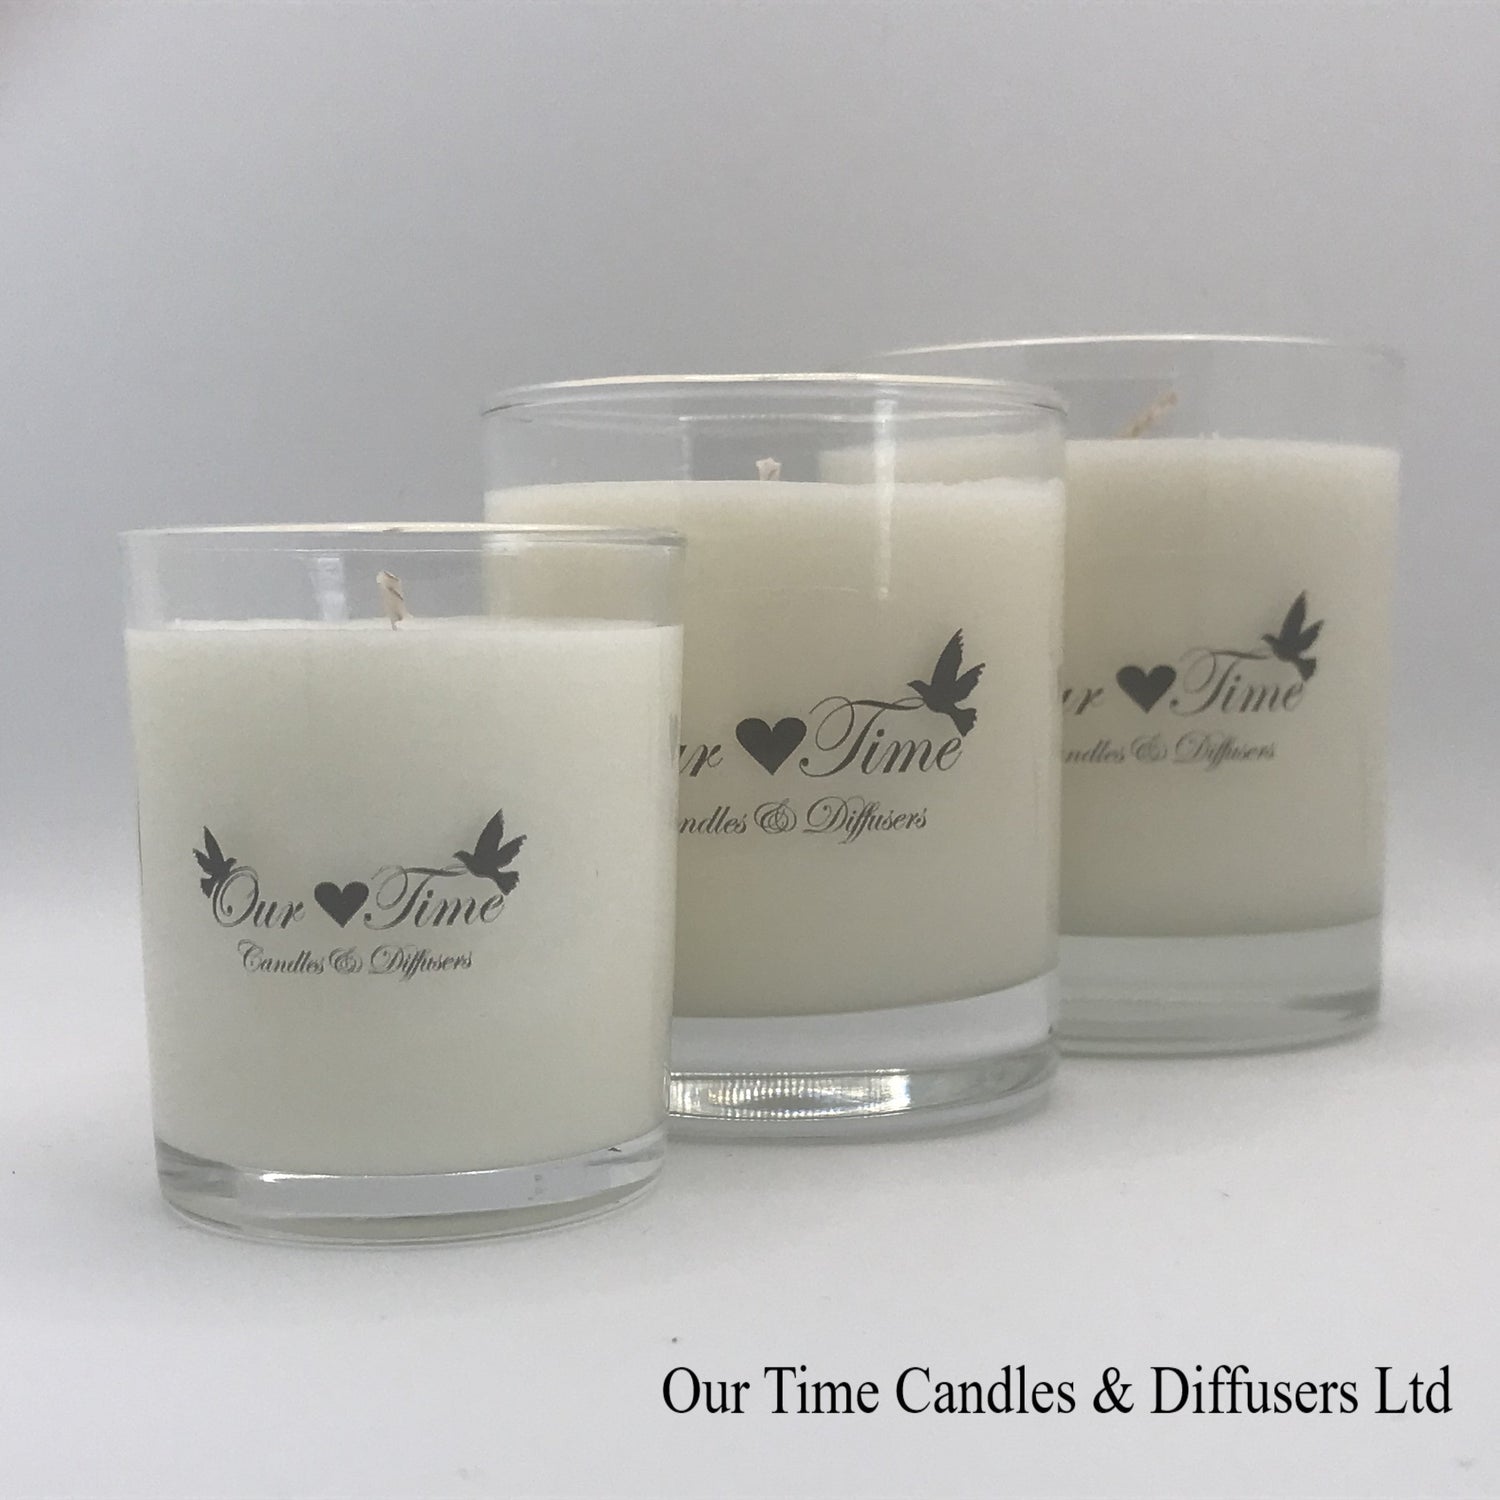 Scented Wax Filled Candles from Our Time Candles and Diffusers